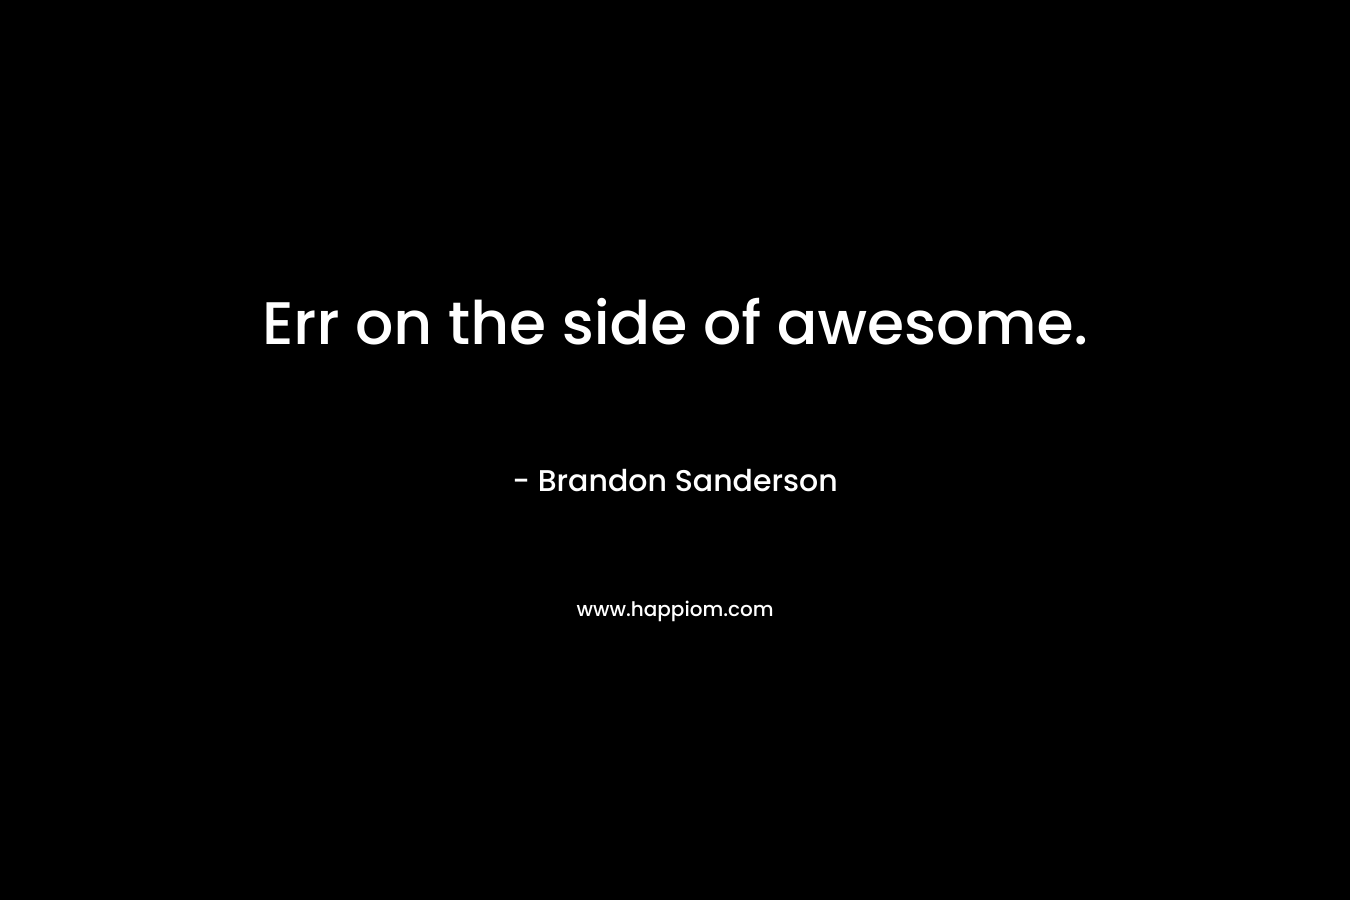 Err on the side of awesome.